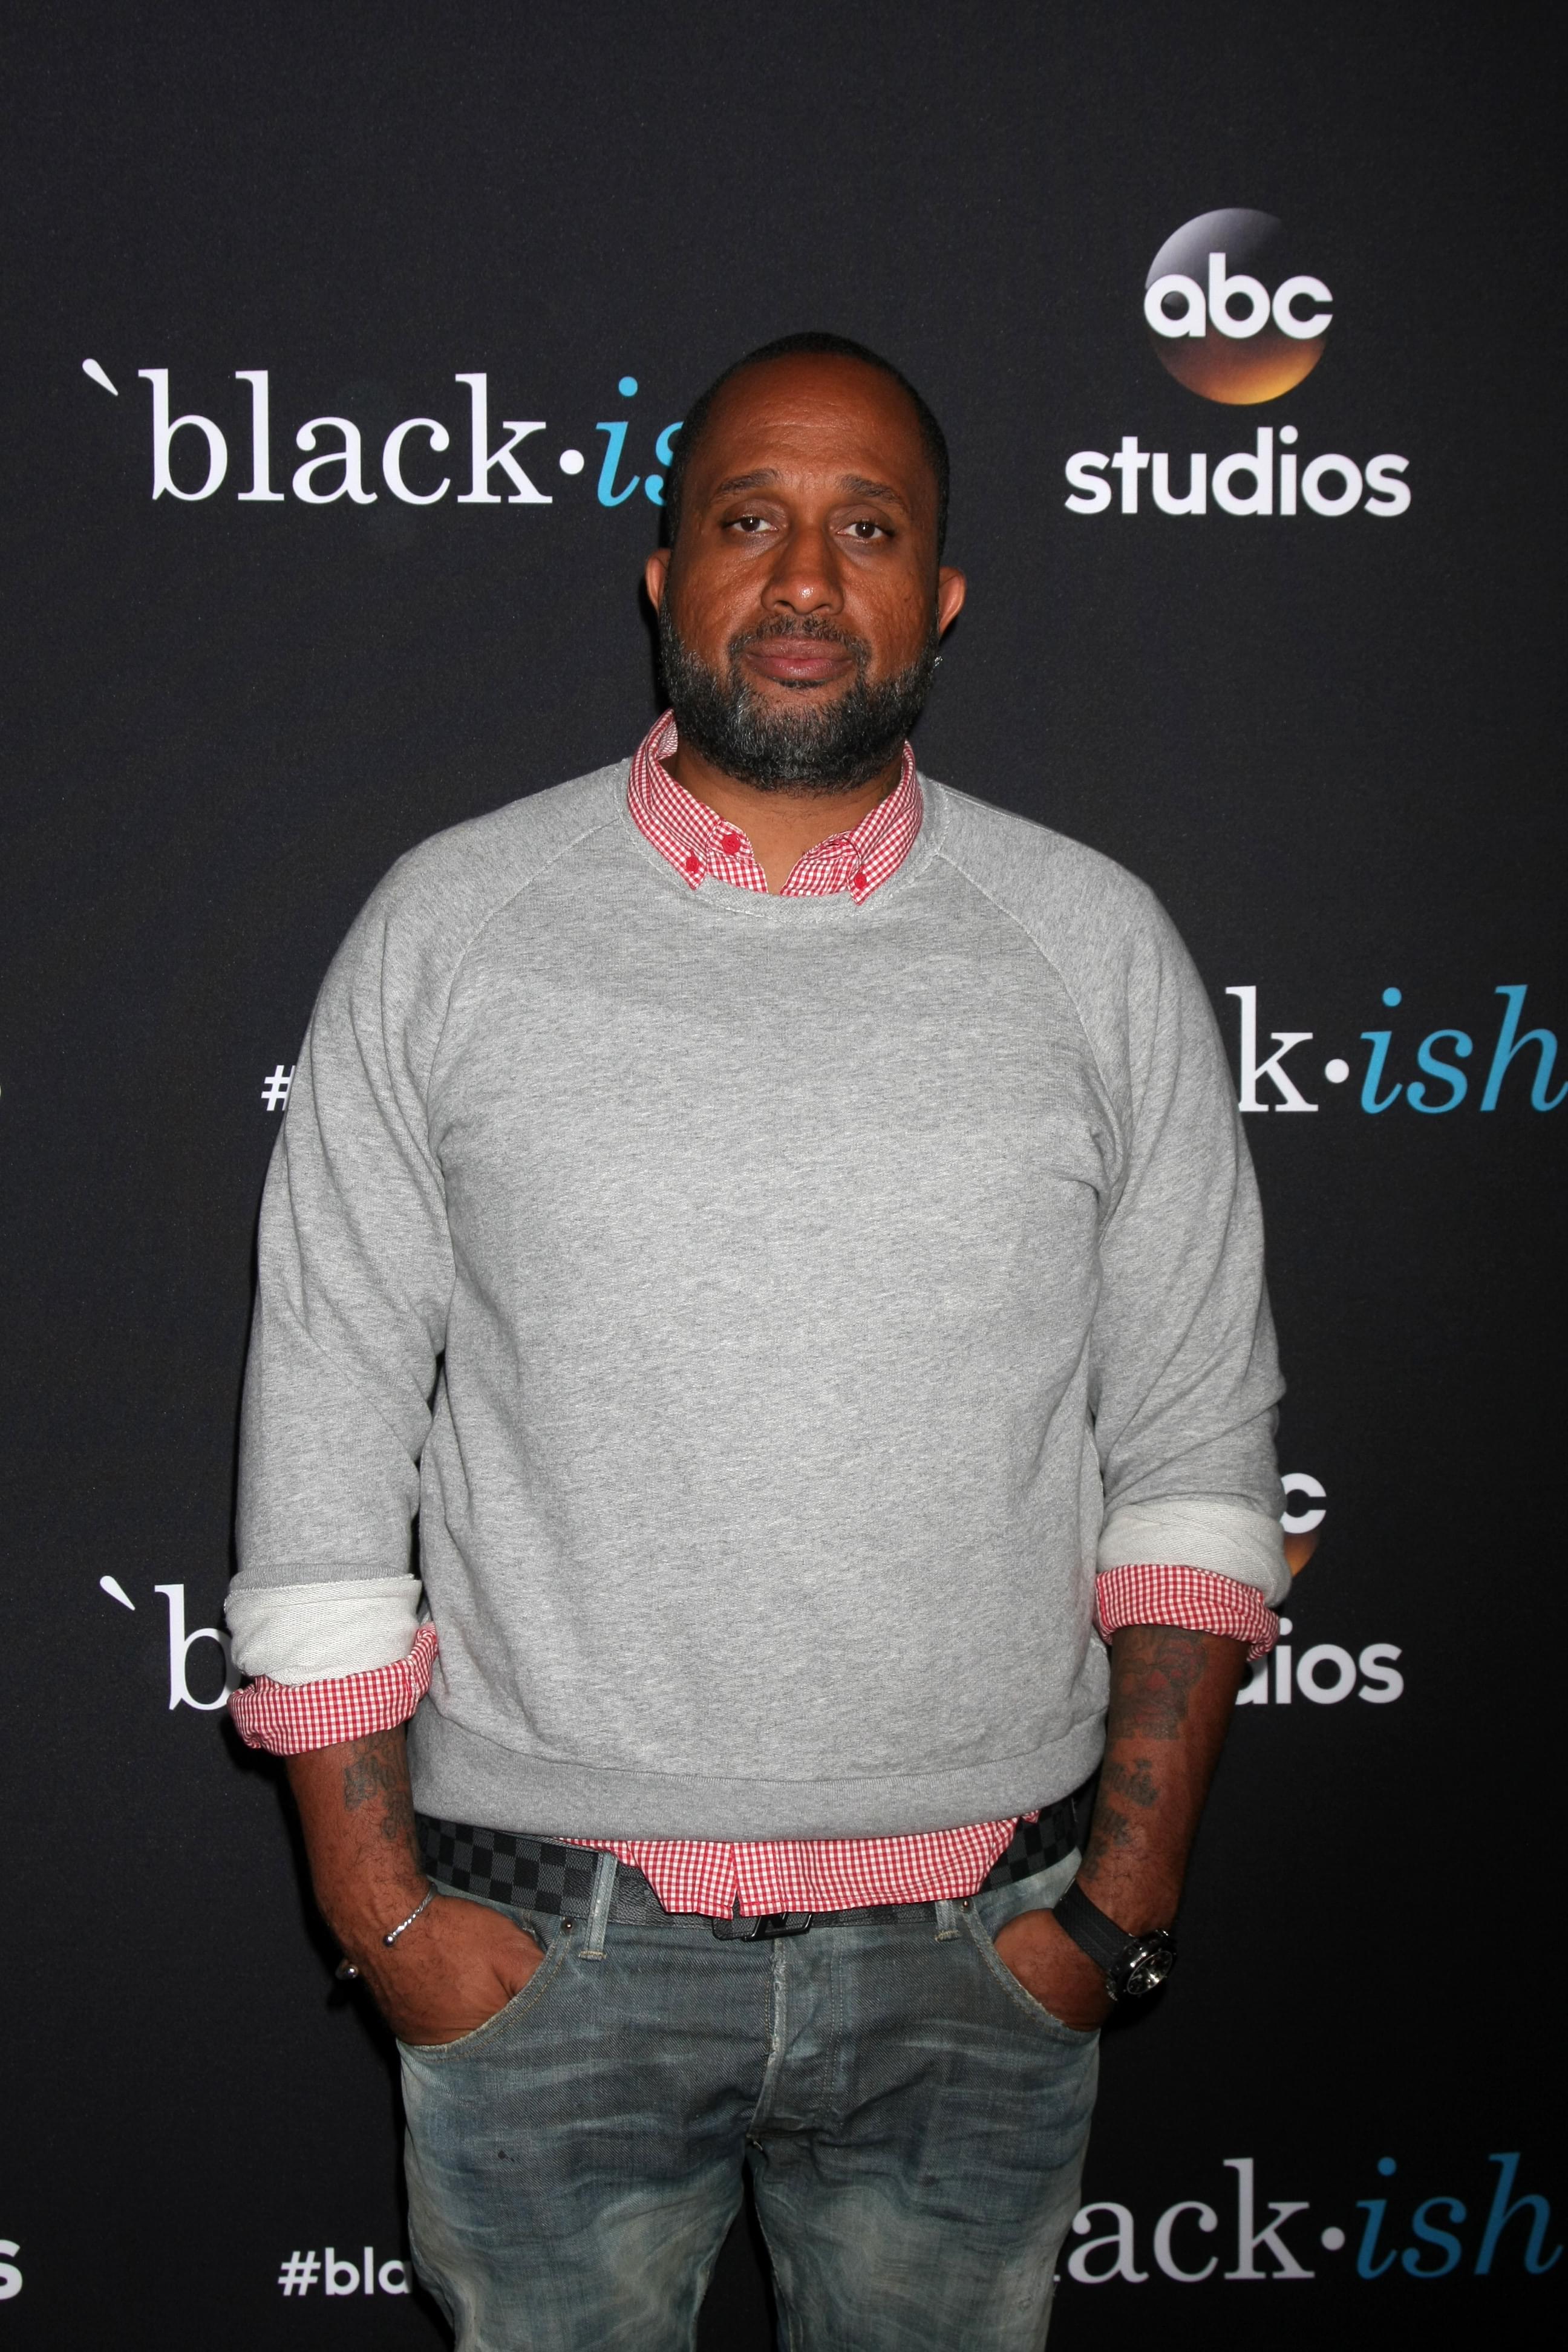 Kenya Barris and 50 Cent Team Up on New Project